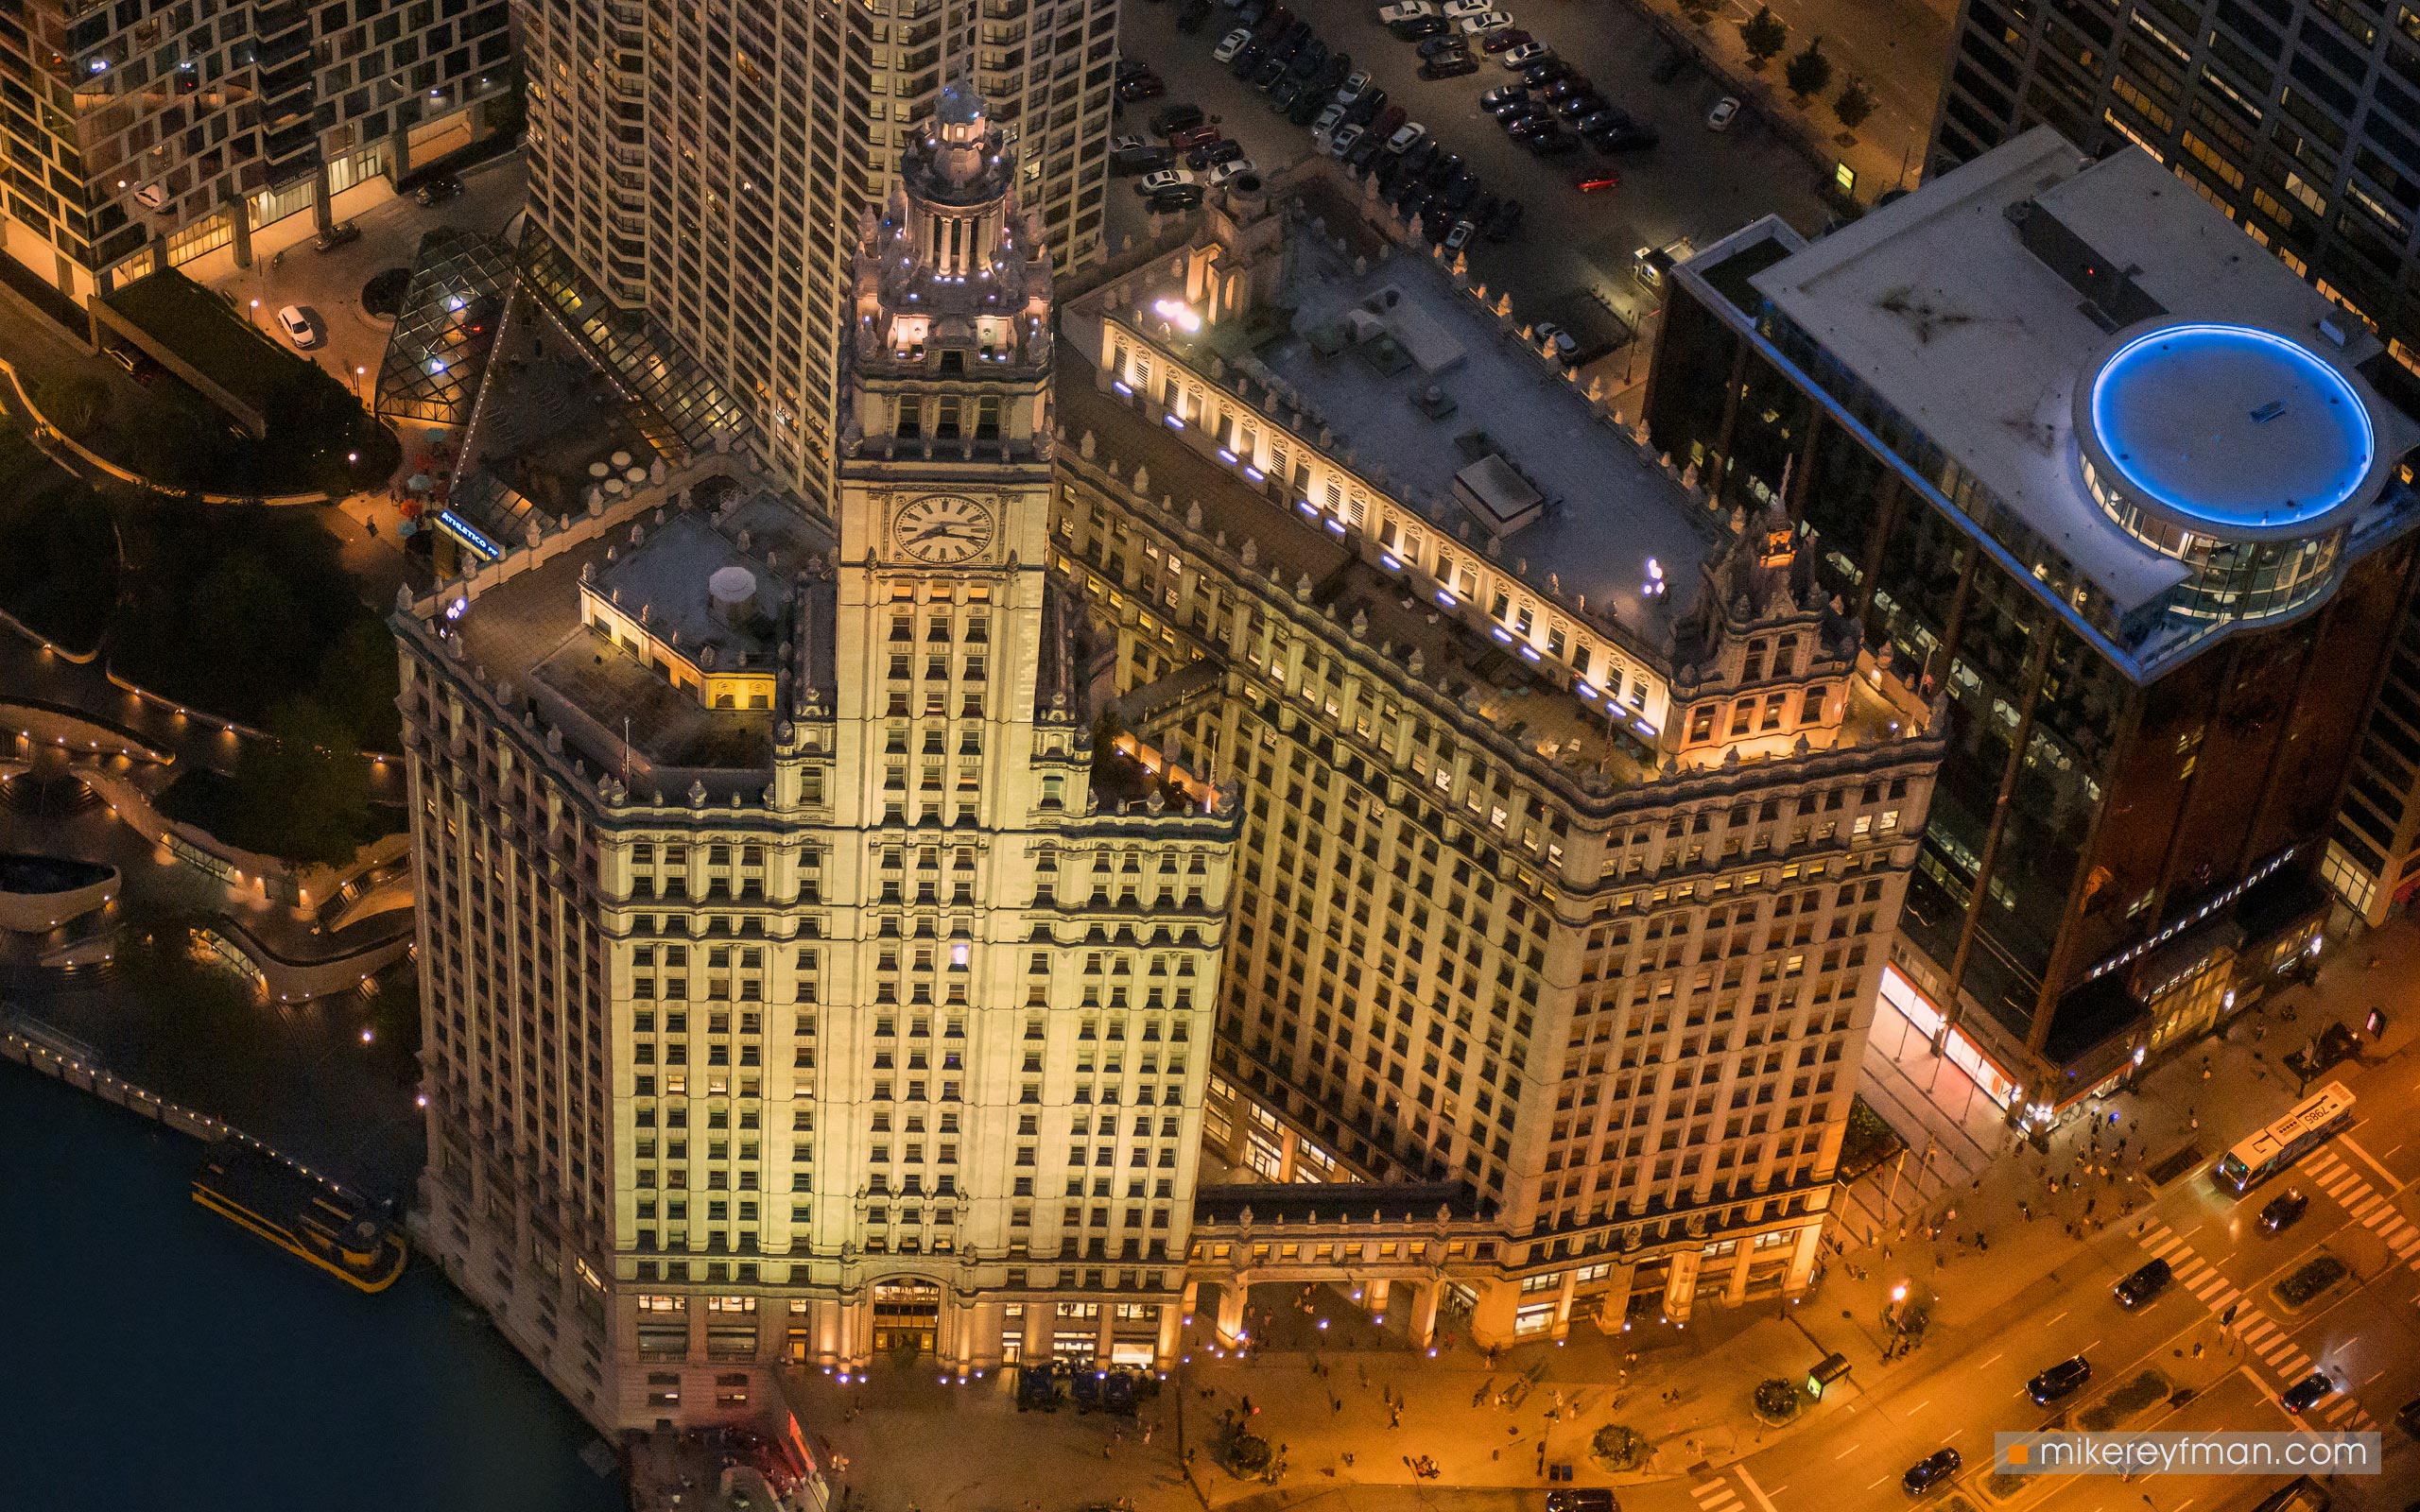 Wrigley and Realtor Buildings, Chicago, Illinois, USA. Aerial view. 024-CH-2_ZRA10241-1 - Ever-beating architectural heart of America. The birthplace of the most iconic buildings in the country. - Mike Reyfman Photography